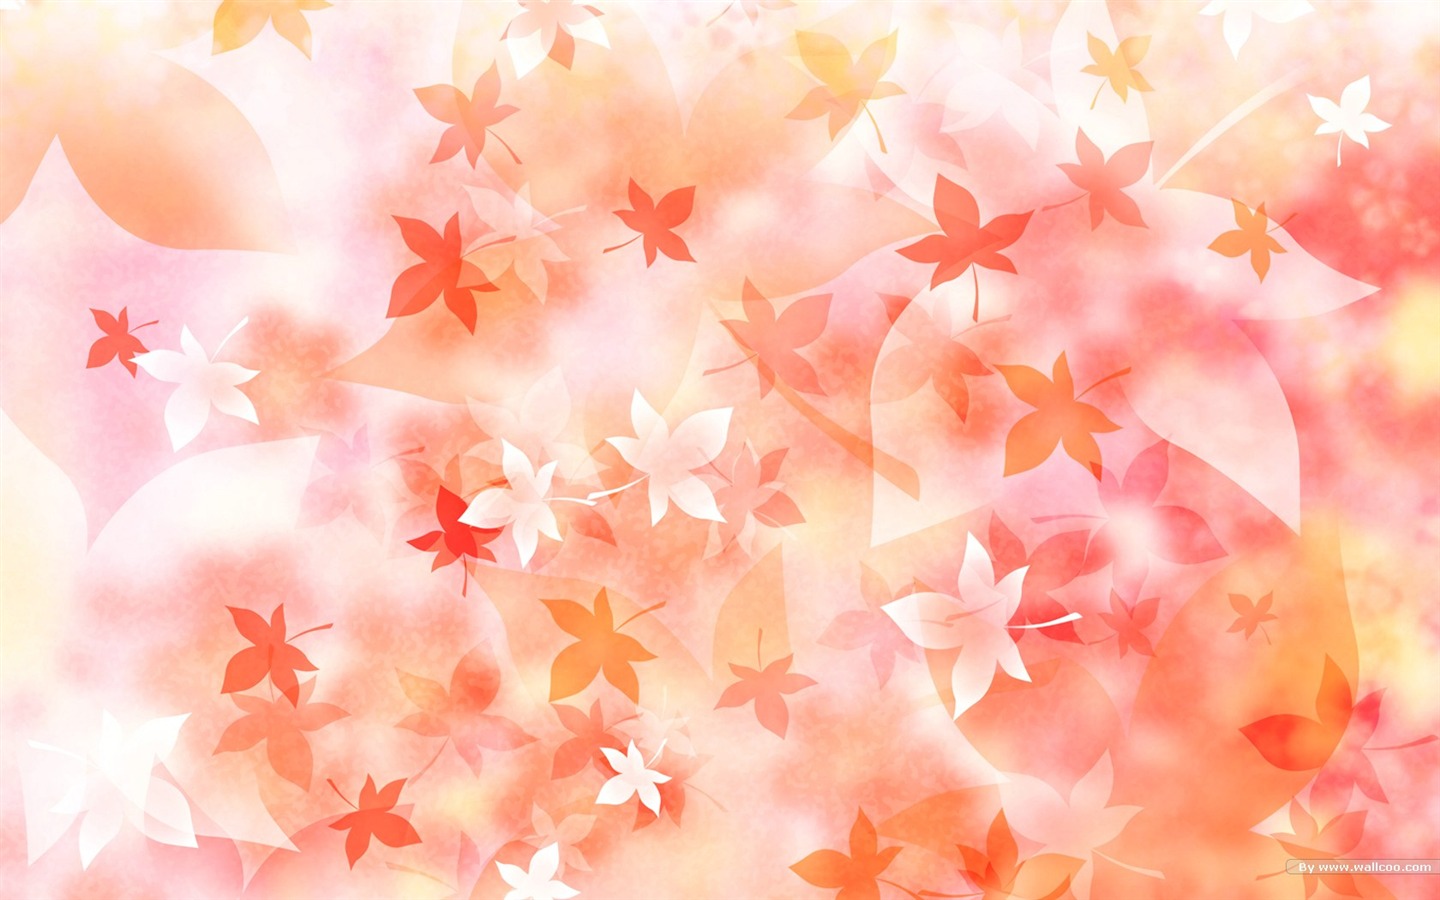 Japan style wallpaper pattern and color #20 - 1440x900